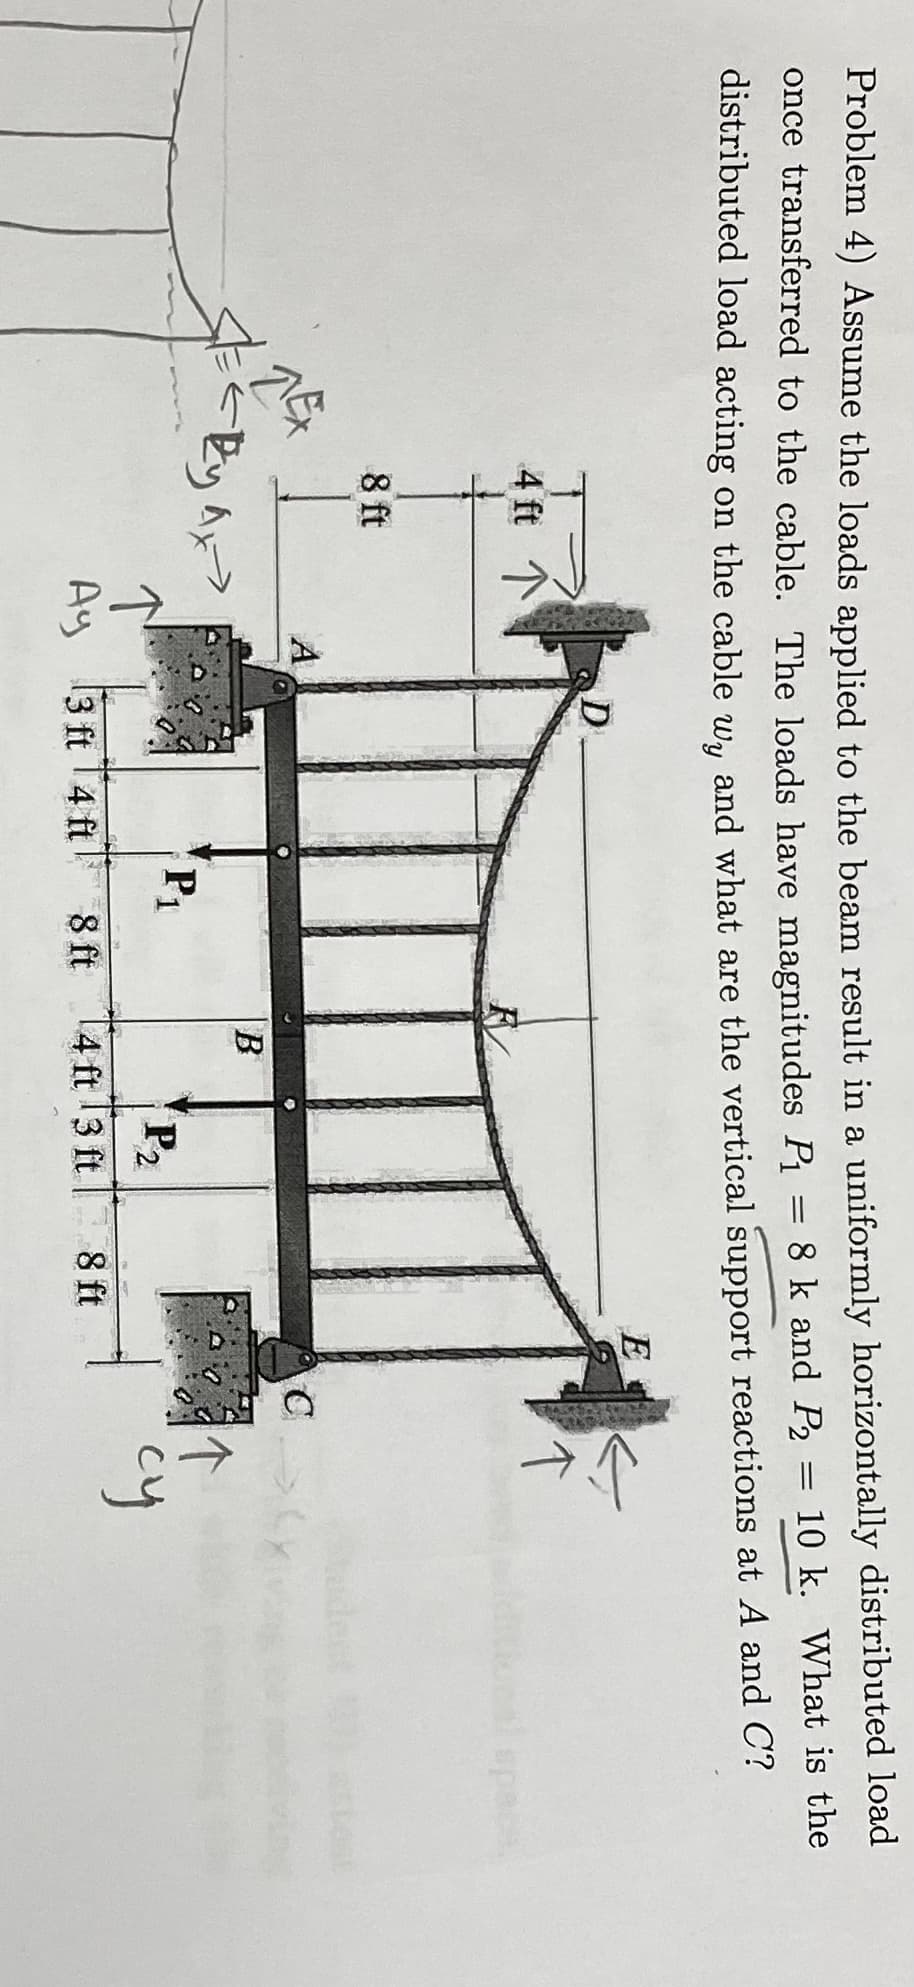 Problem 4) Assume the loads applied to the beam result in a uniformly horizontally distributed load
once transferred to the cable. The loads have magnitudes Pi = 8 k and P2
10 k. What is the
distributed load acting on the cable w, and what are the vertical support reactions at A and C?
E
4 ft
lspace
8 ft
A
B
Ey Ax
P1
P2
cy
Ay
13 ft 14 ft
8 ft
14 ft 3 ft
8 ft
